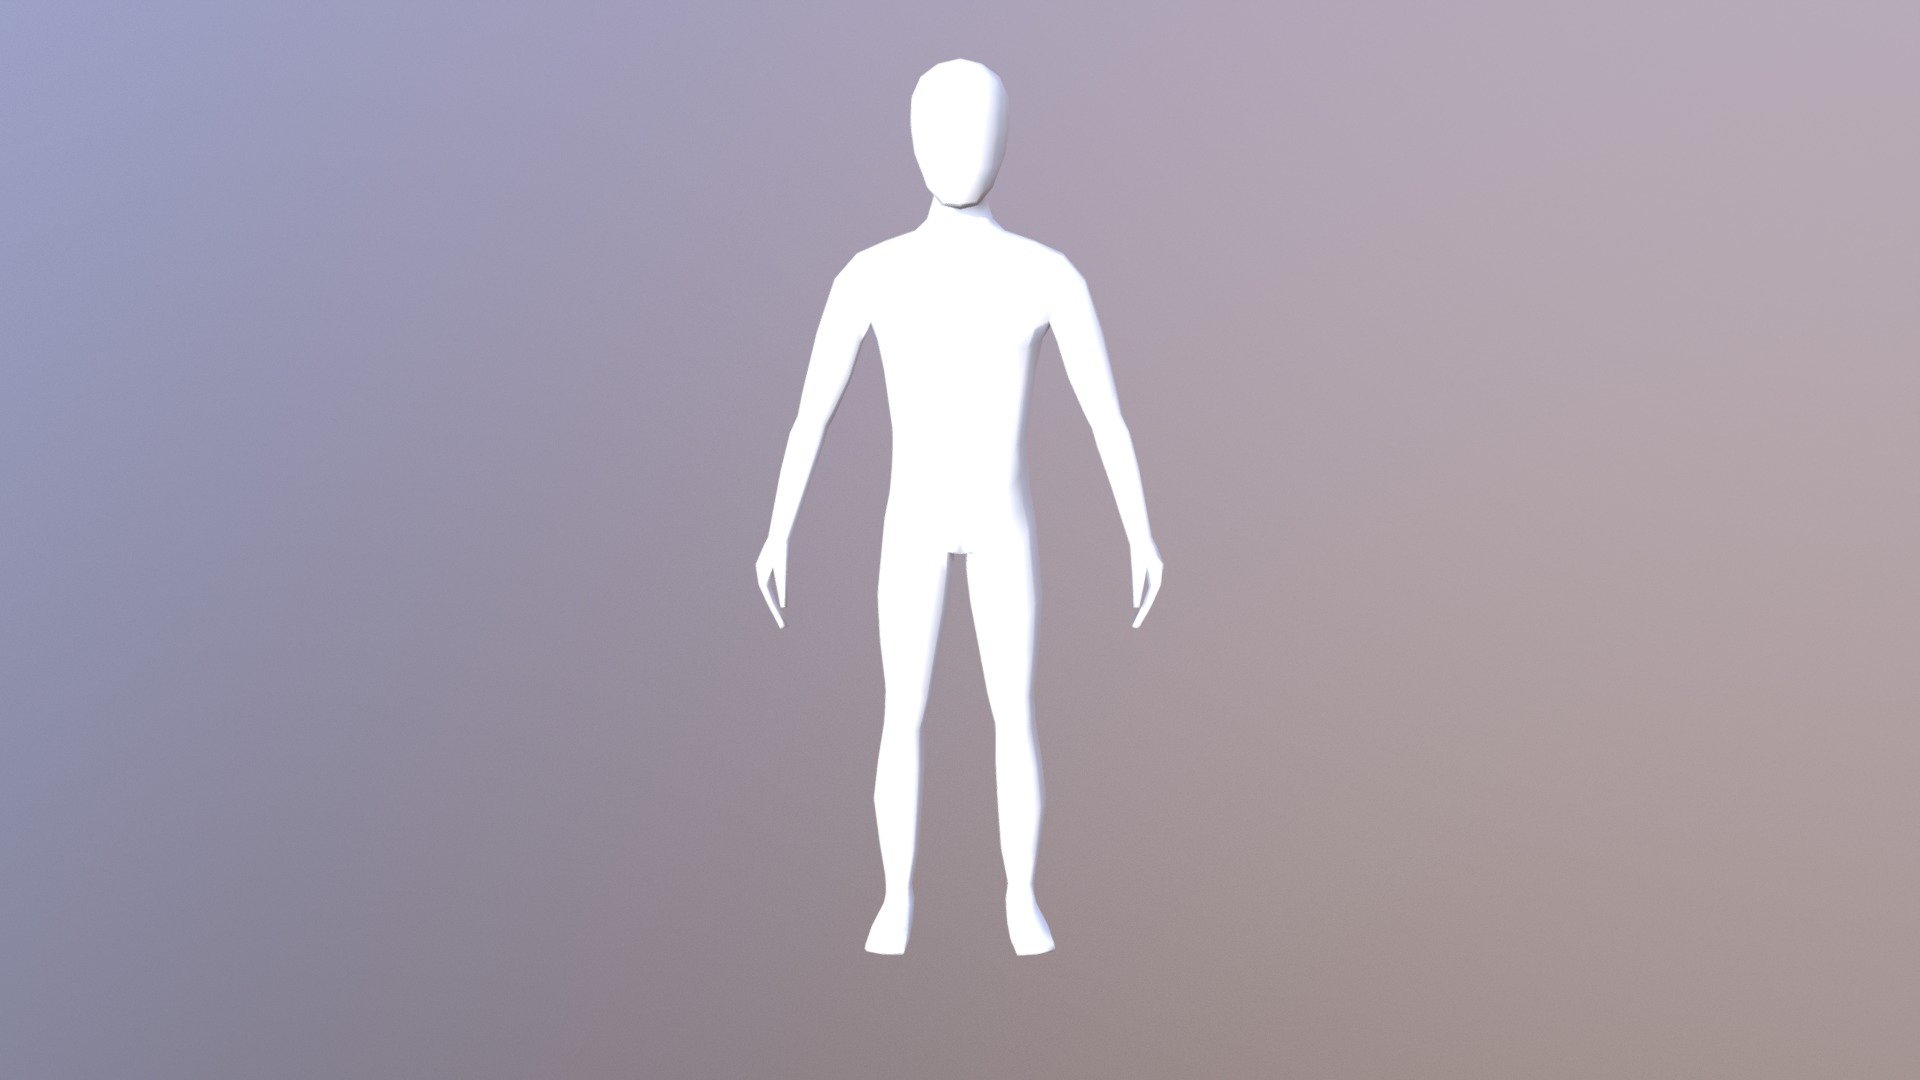 Low poly blender character